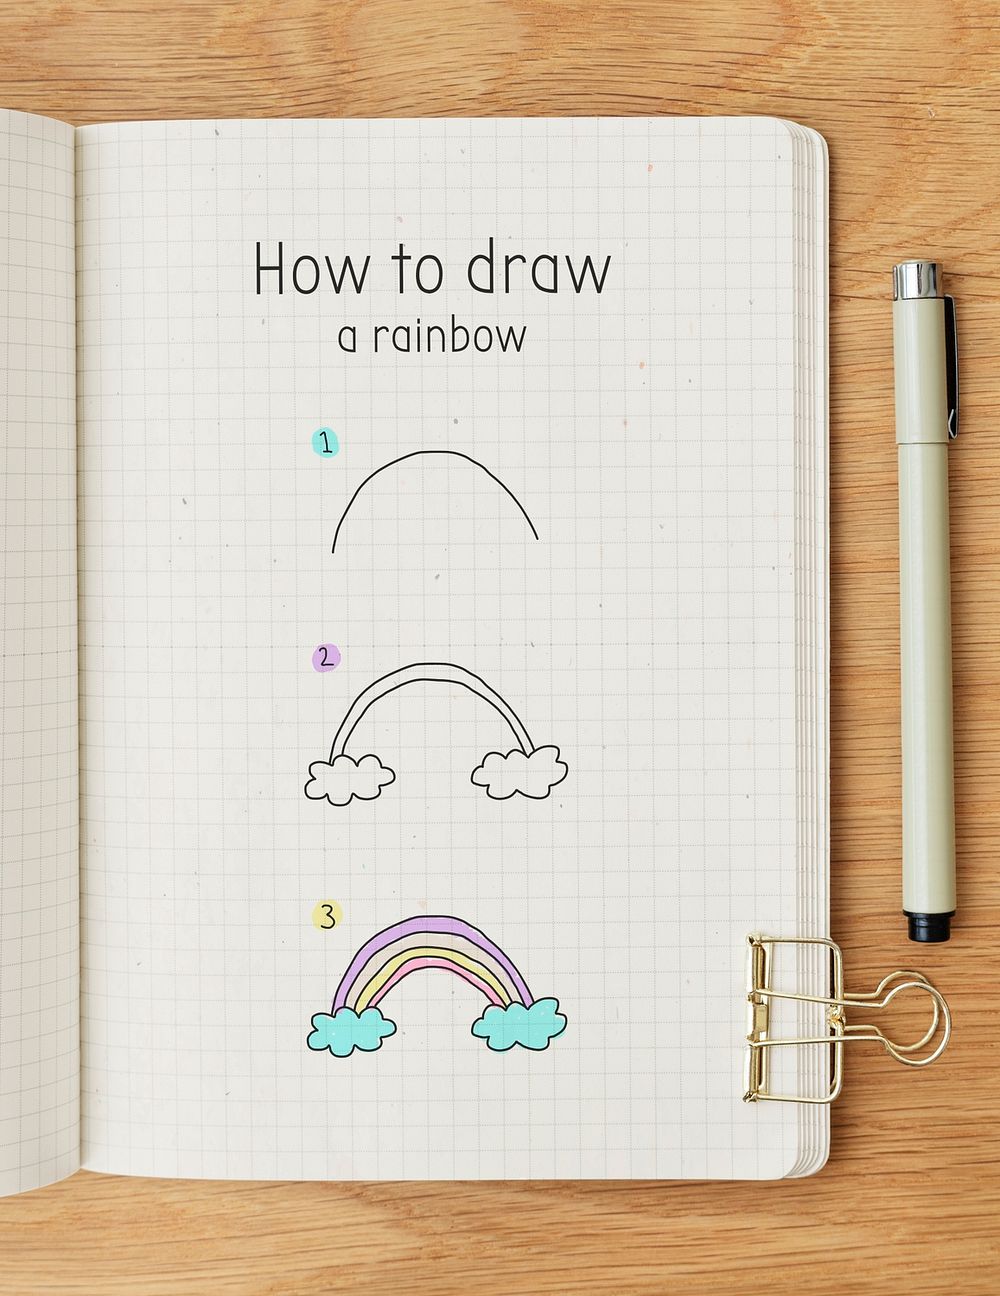 How to draw a rainbow doodle tutorial on a white paper mockup